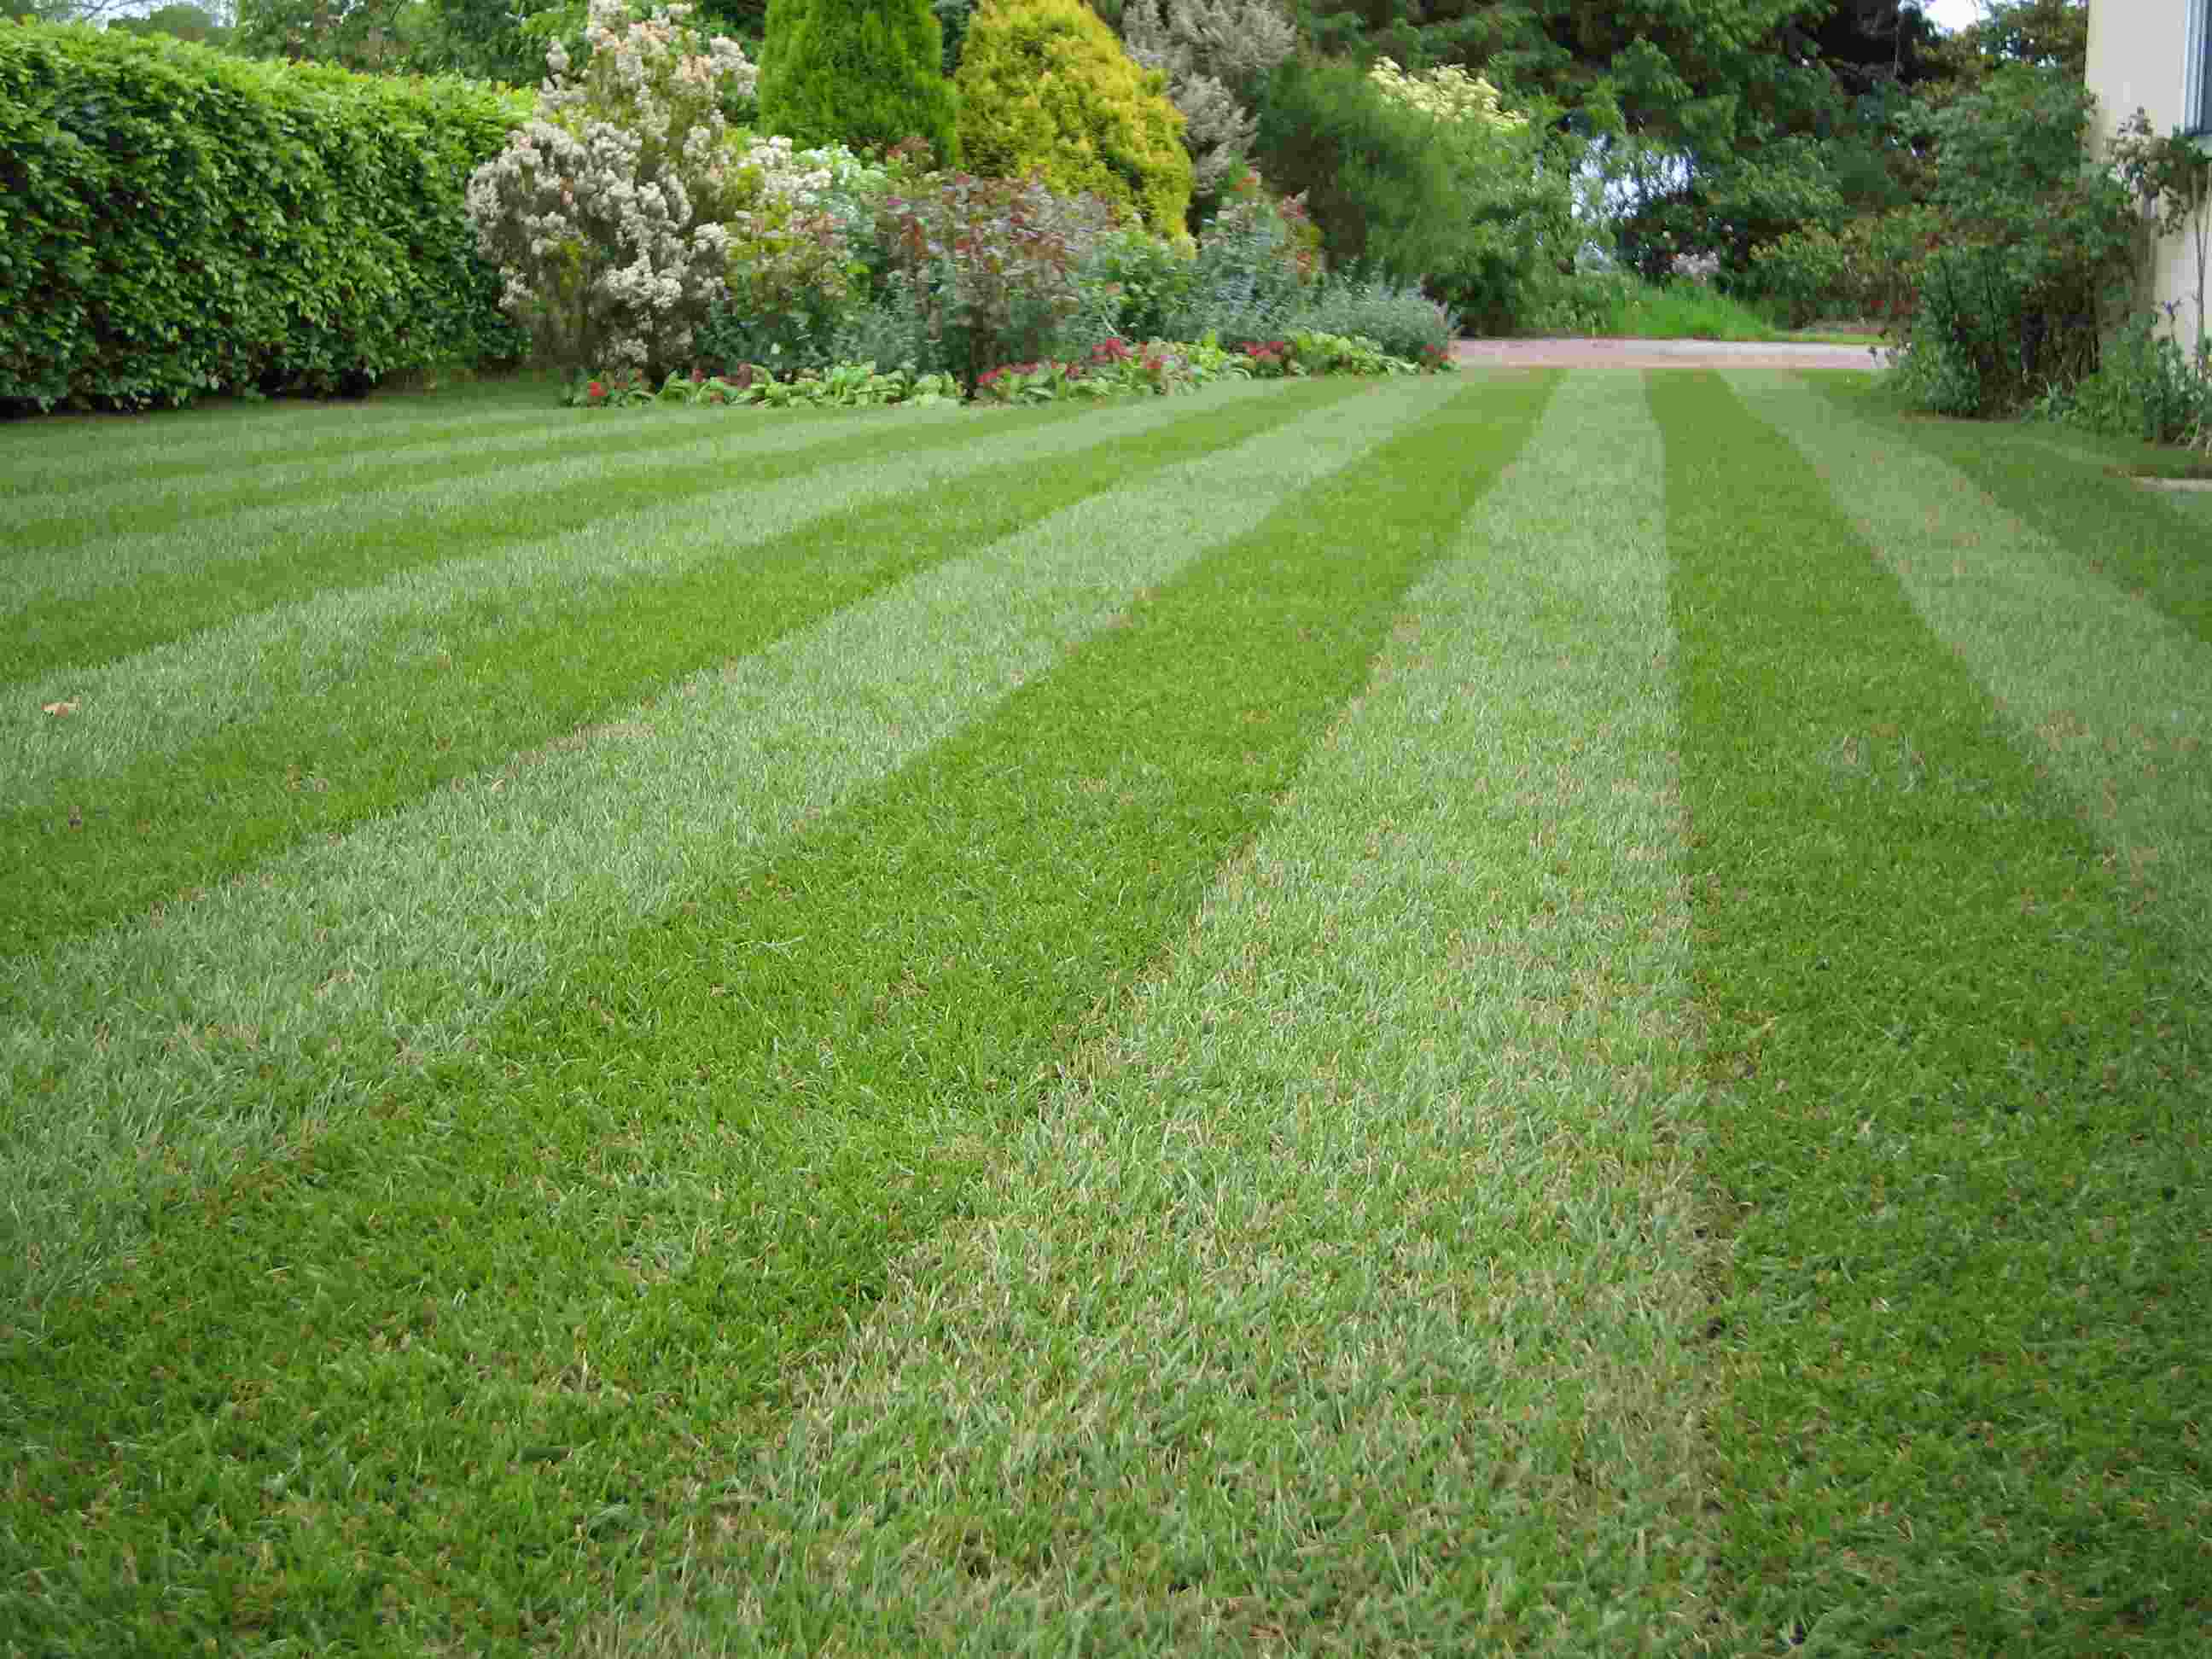 A well maintained lawn